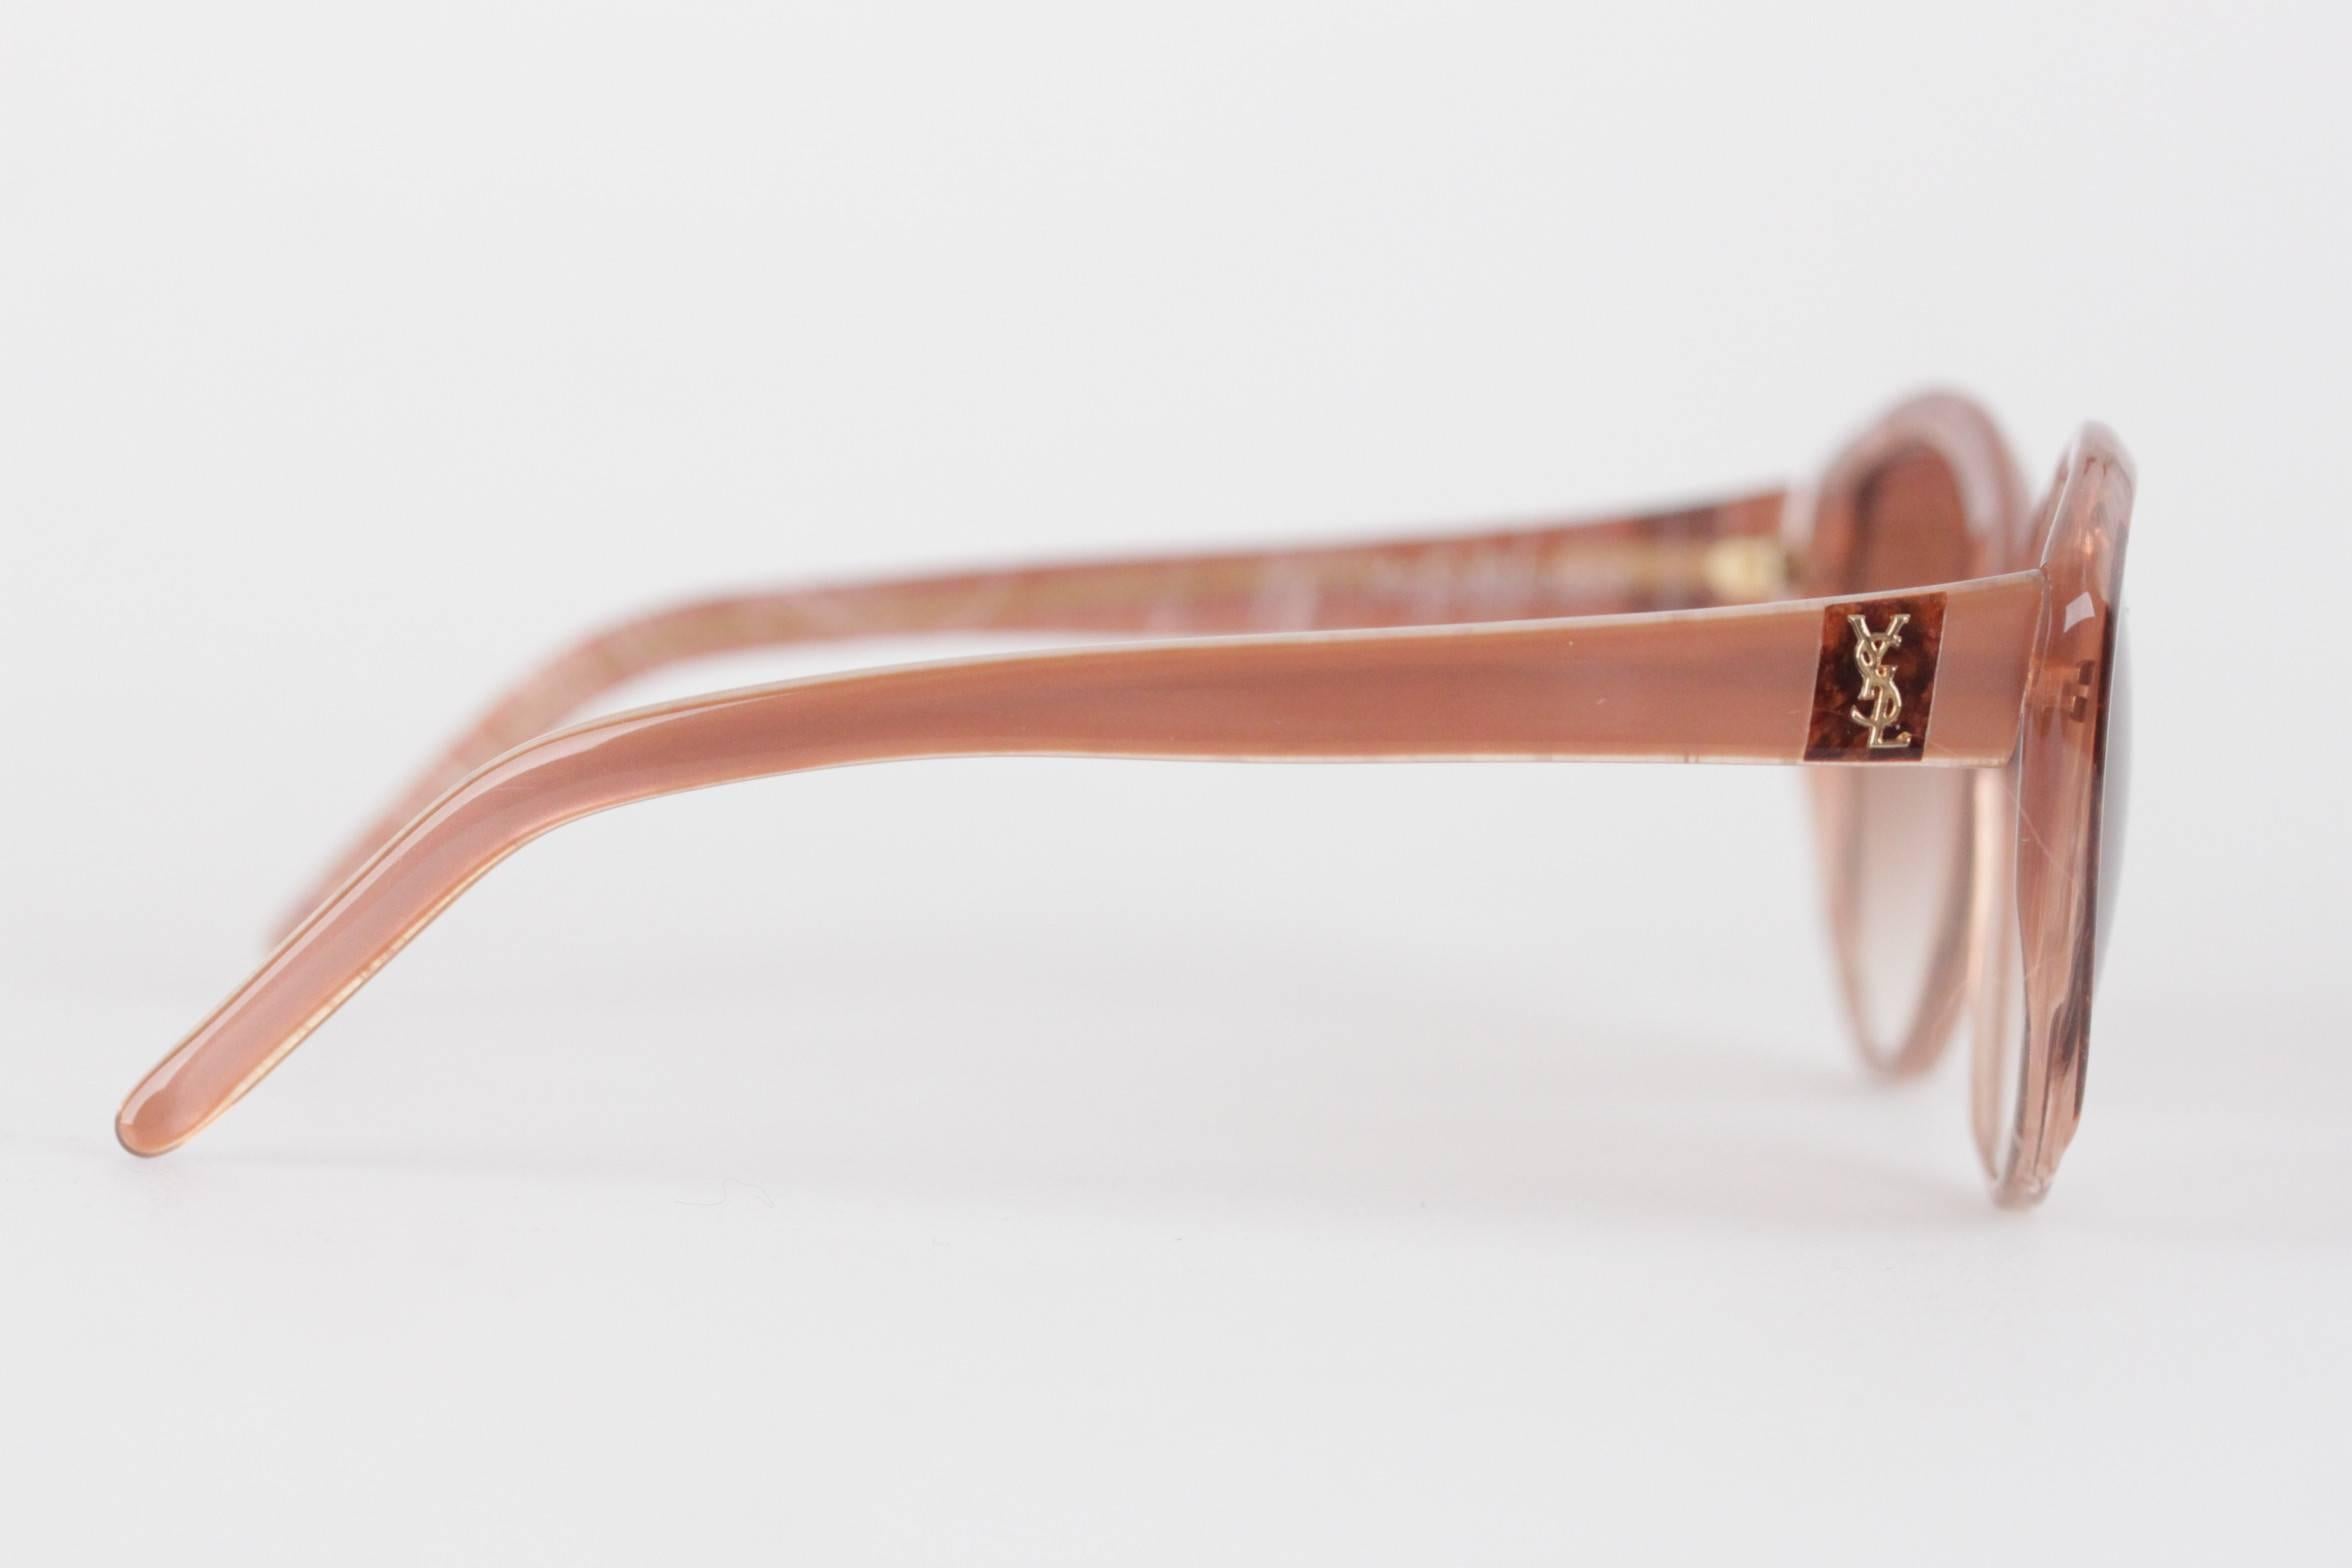 Beautiful, Oversized, Cat-Eye YVES SAINT LAURENT rare sunglasses

Handmade in France

Marbled effect, with different shades of pink

YSL gold metal logos on the sides

Model: 8702 - P74

MINT Pink GRADIENT 100% UV protection lens

